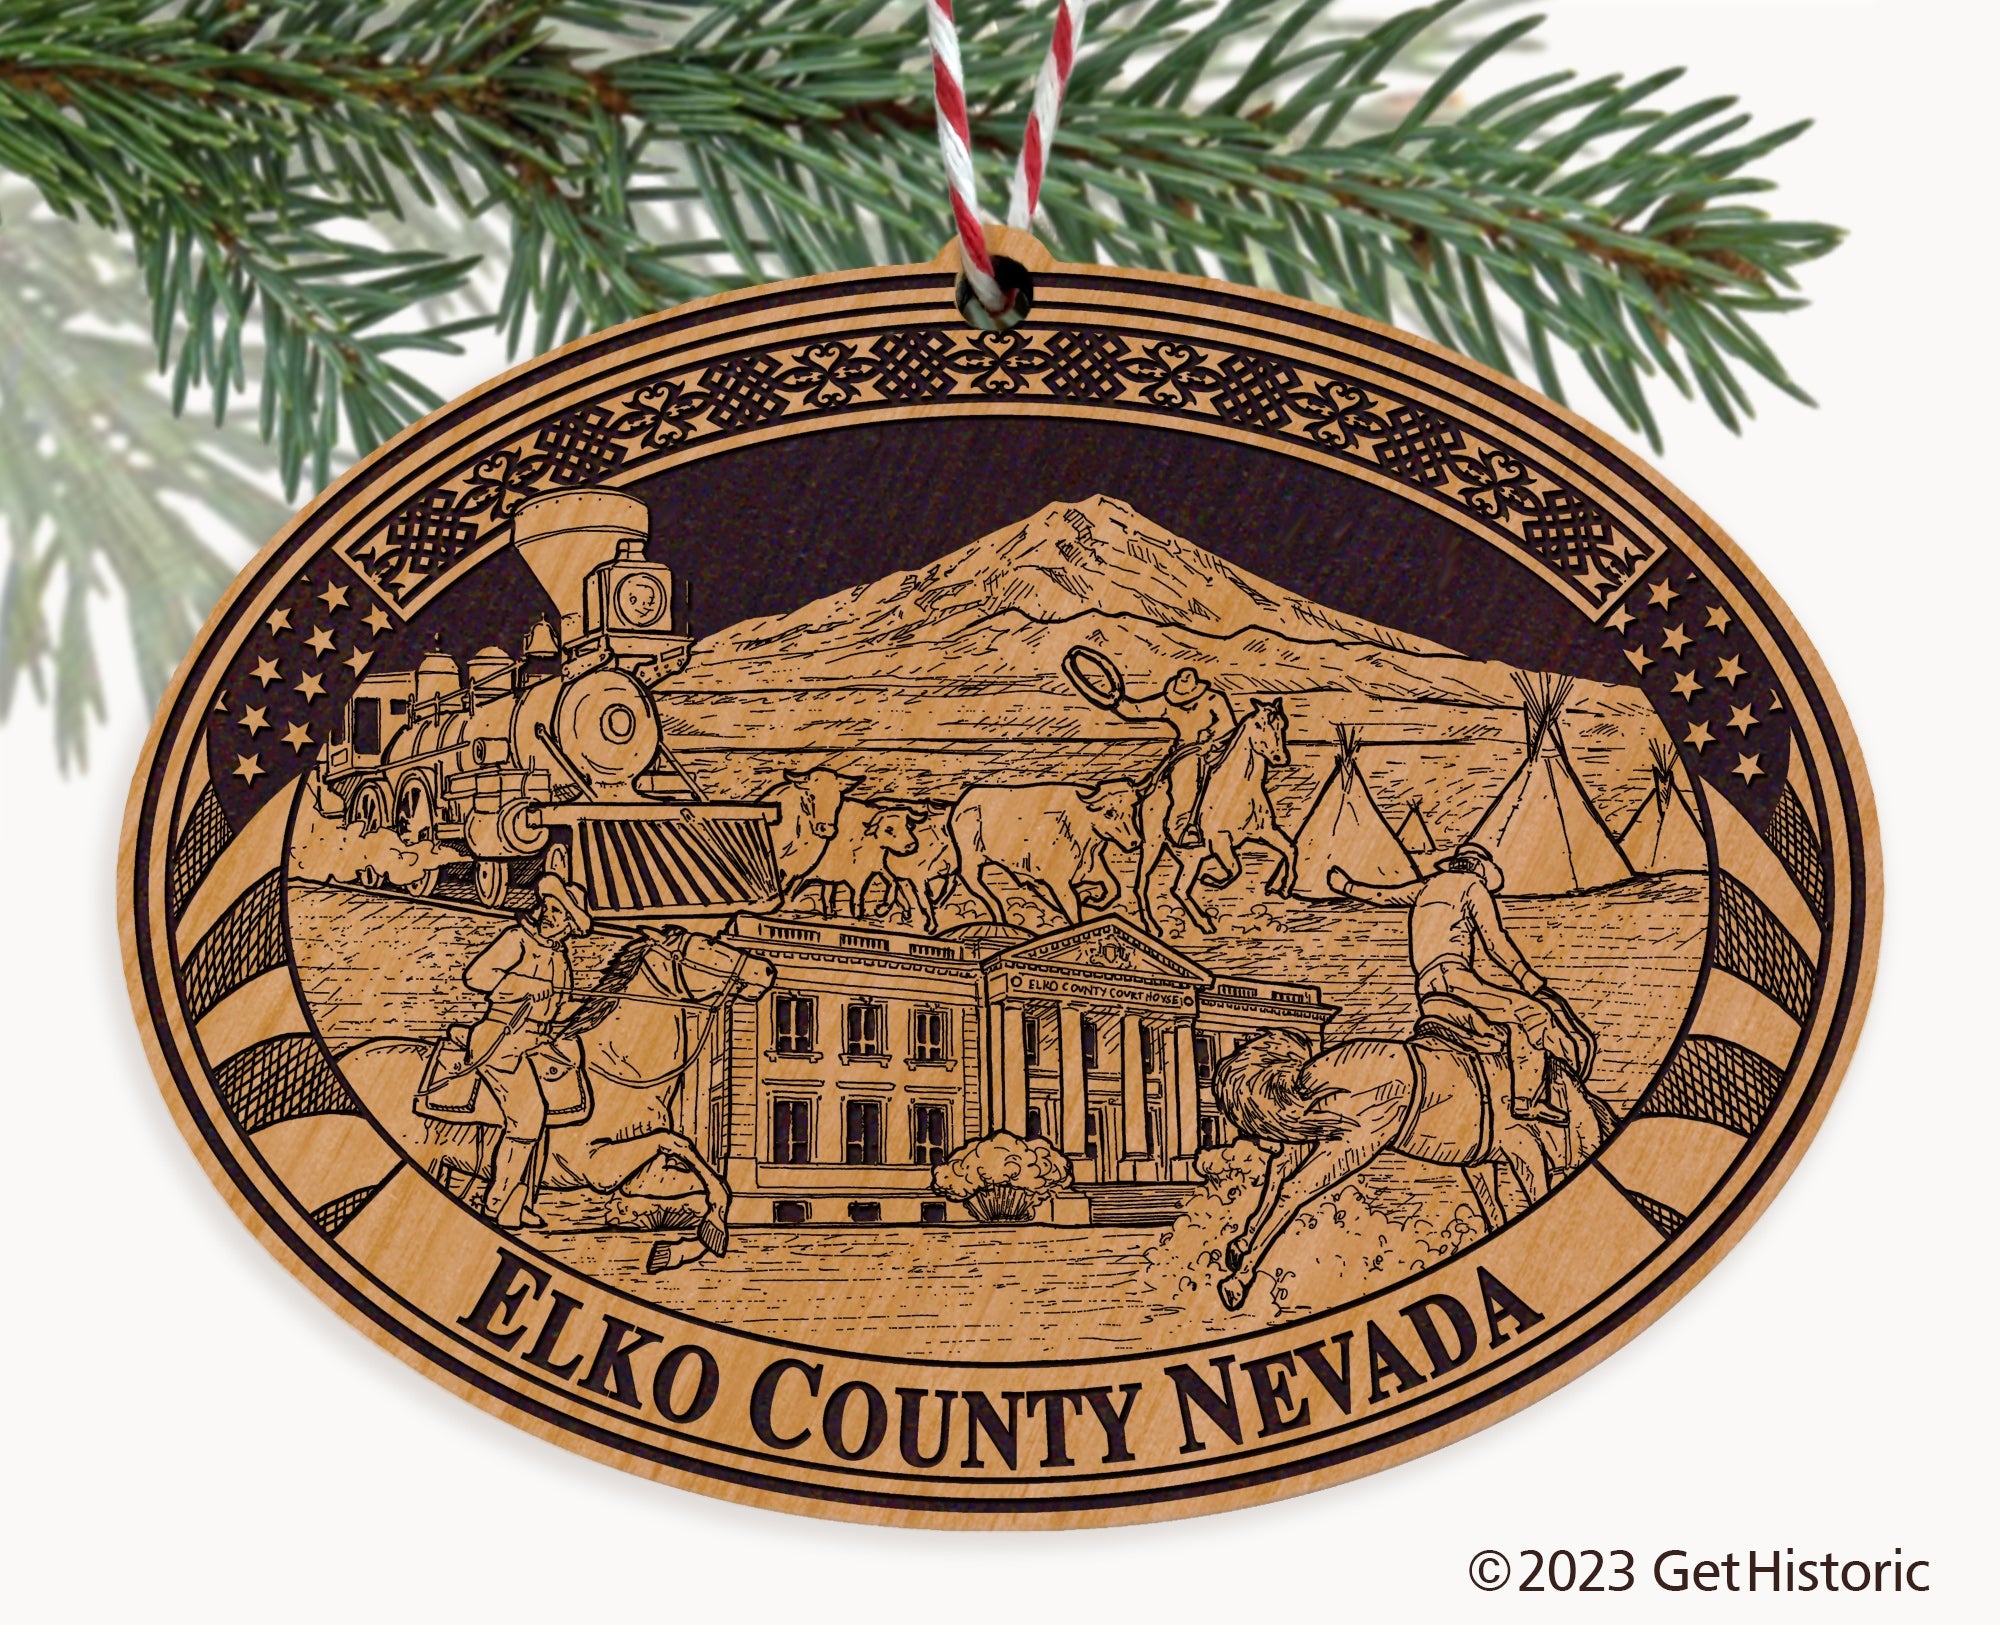 Elko County Nevada Engraved Natural Ornament